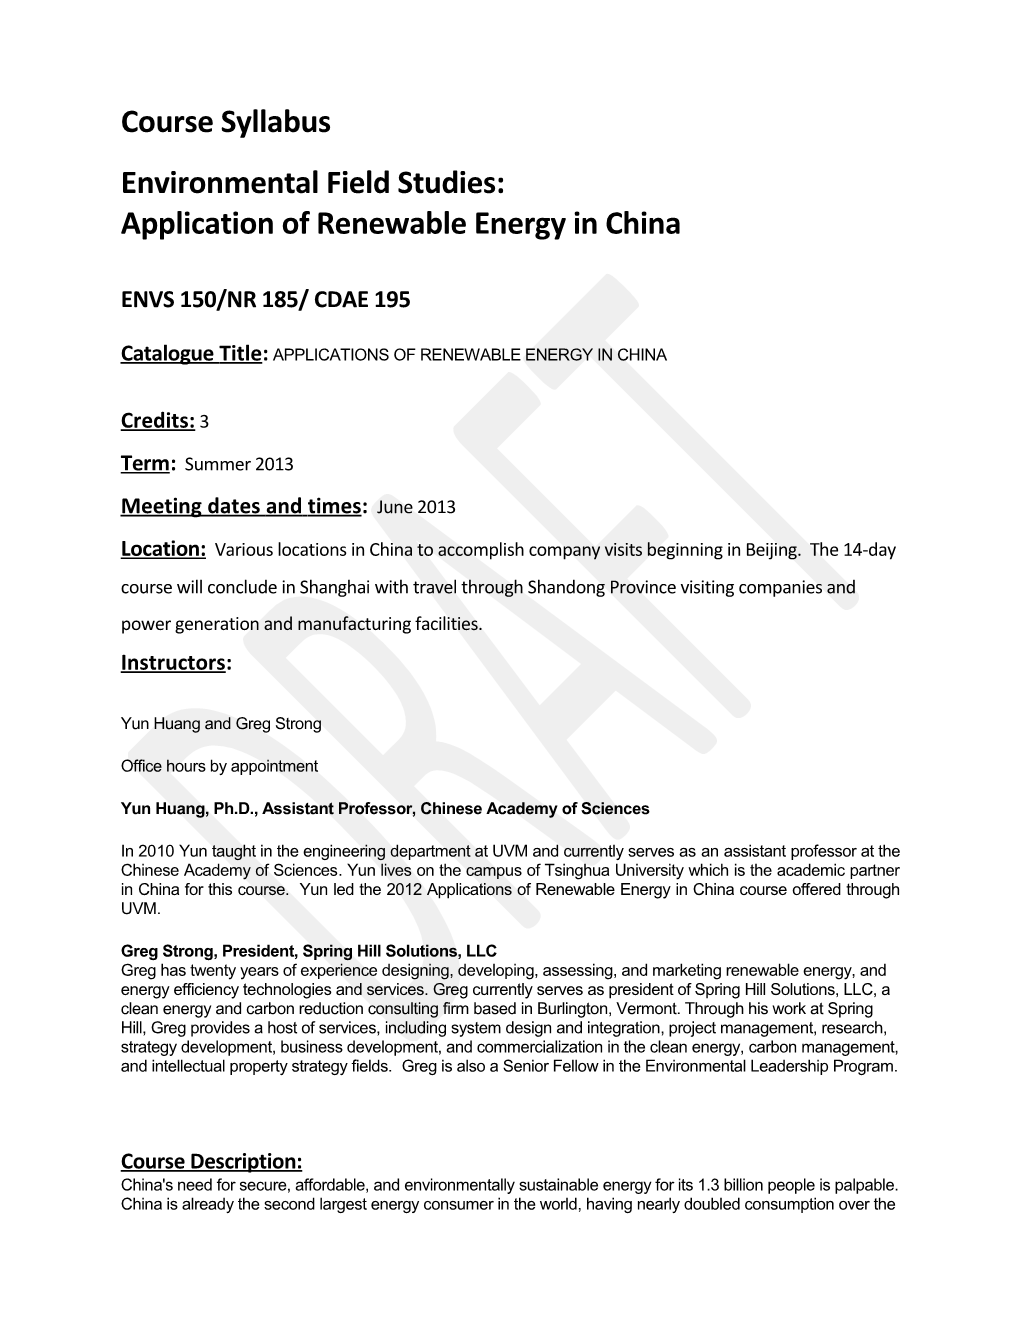 Application of Renewable Energy in China